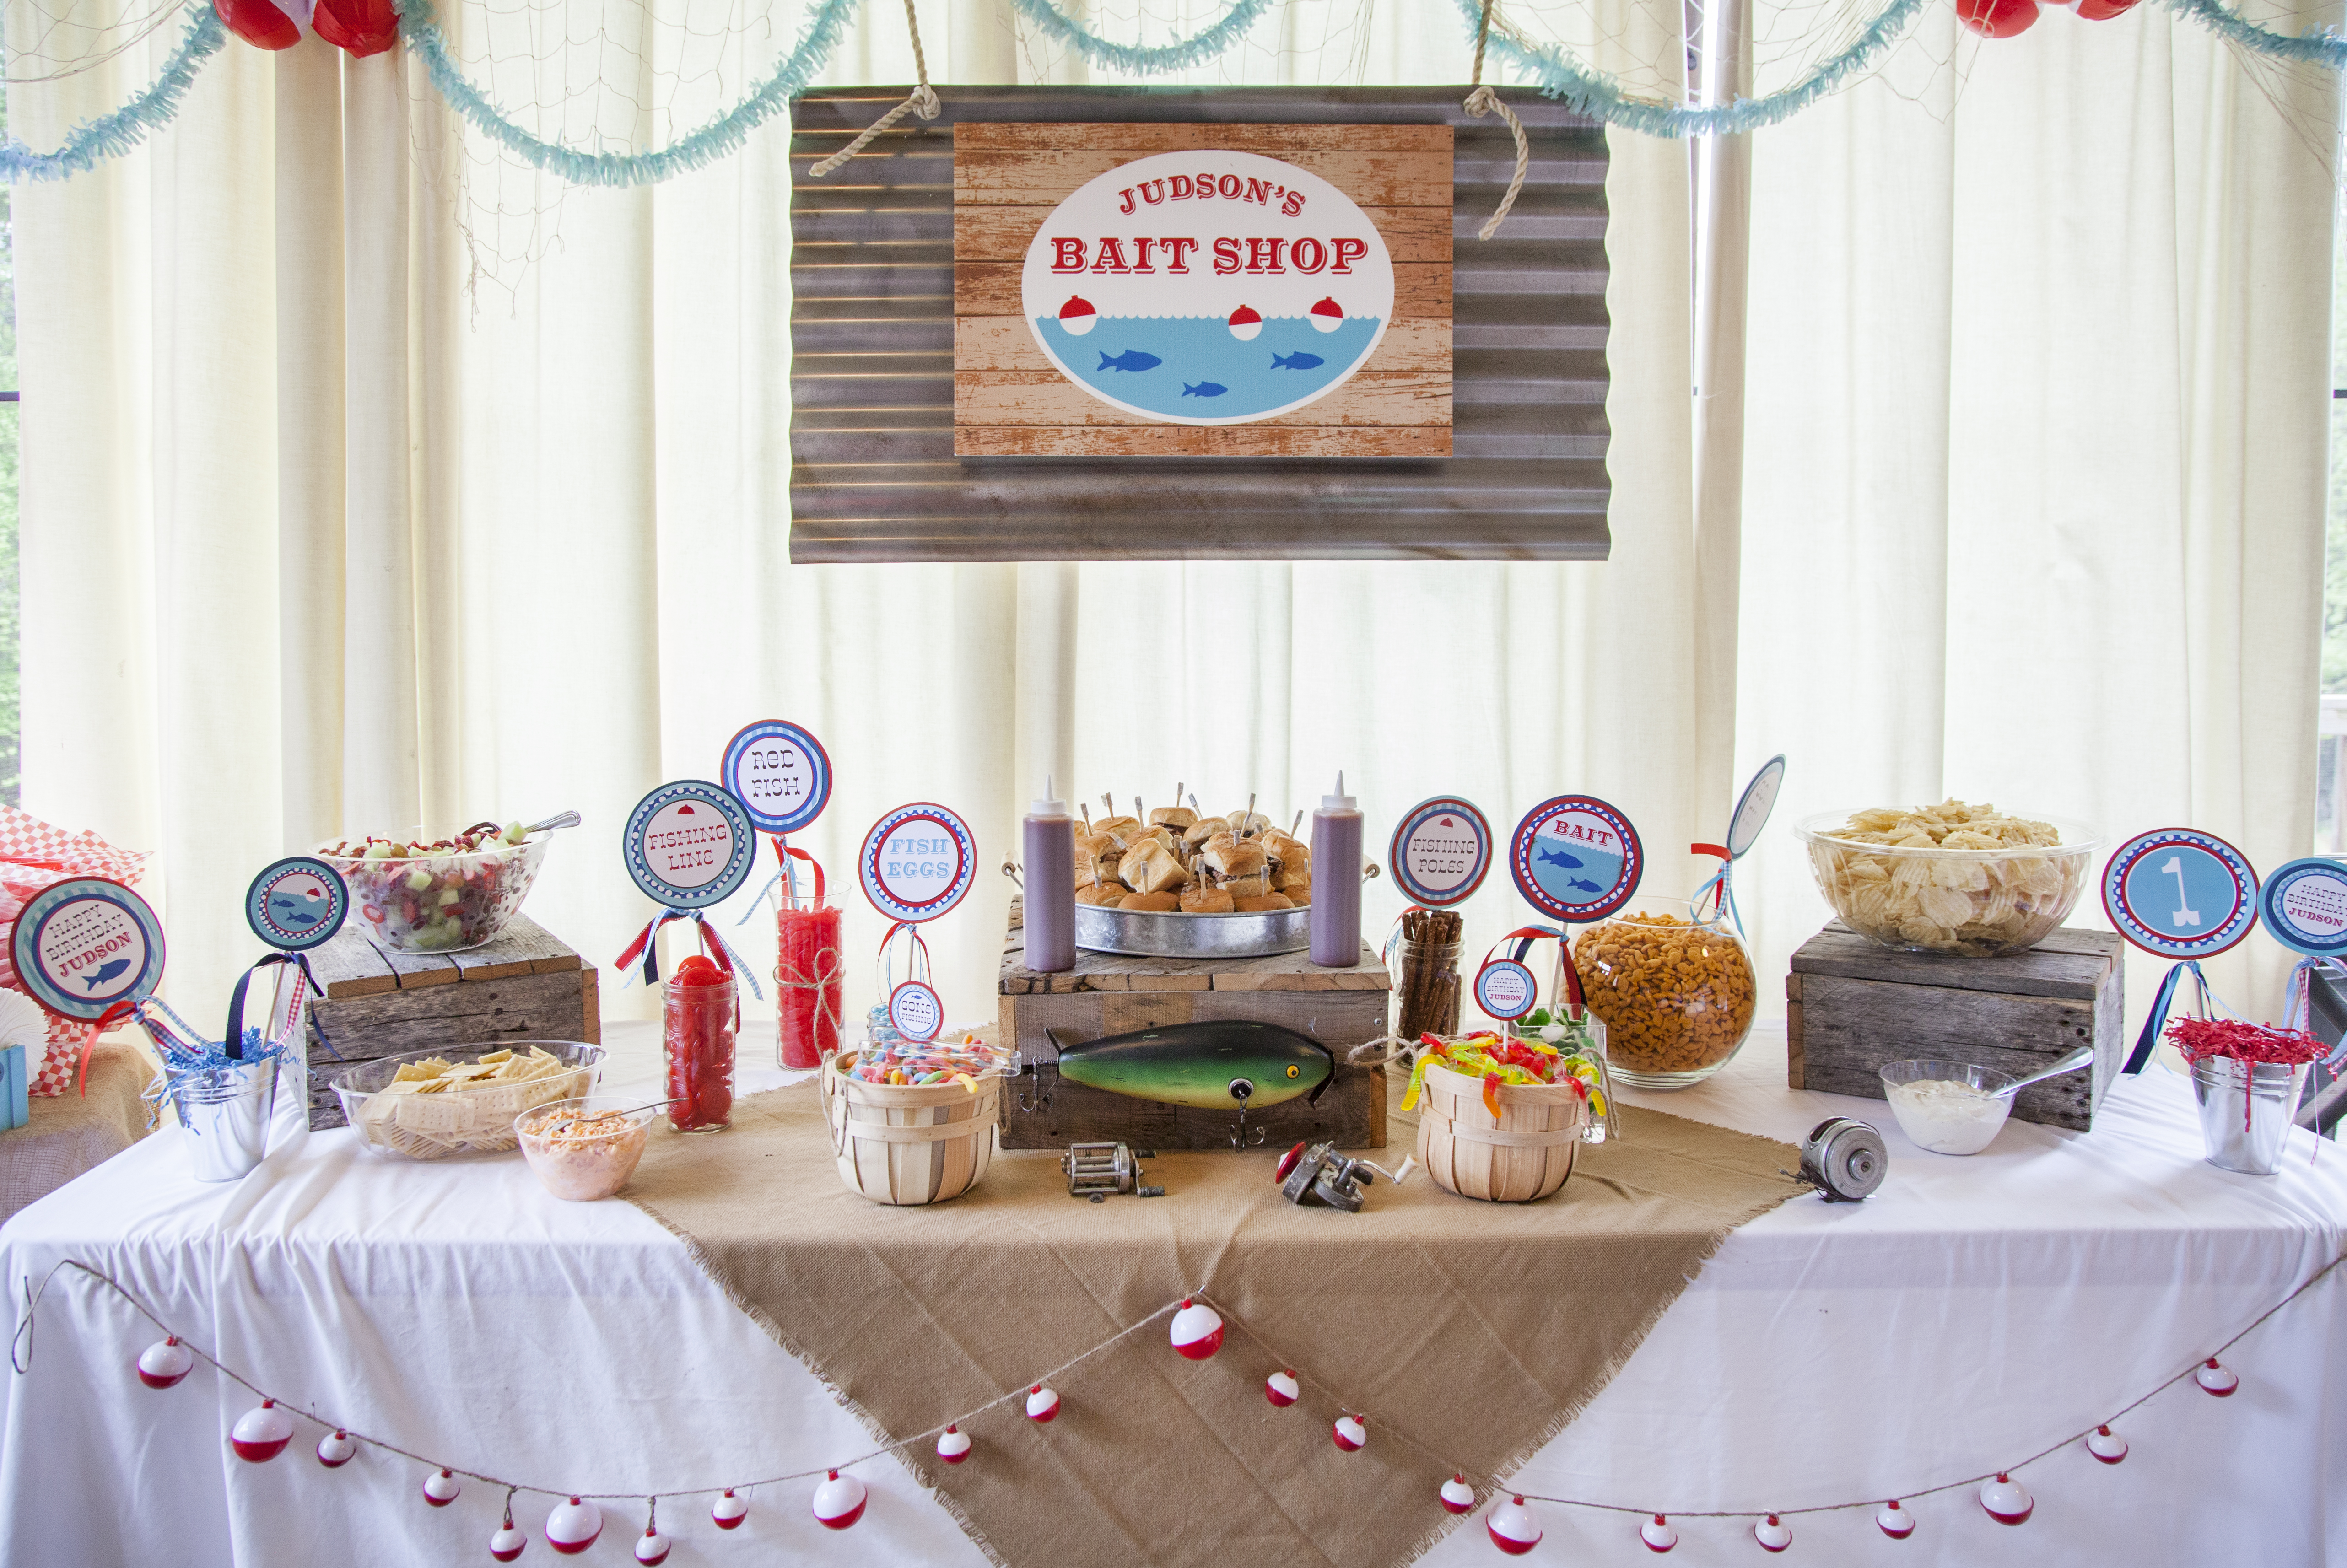 Judson's Bait Shop, a first birthday celebration - Life in the